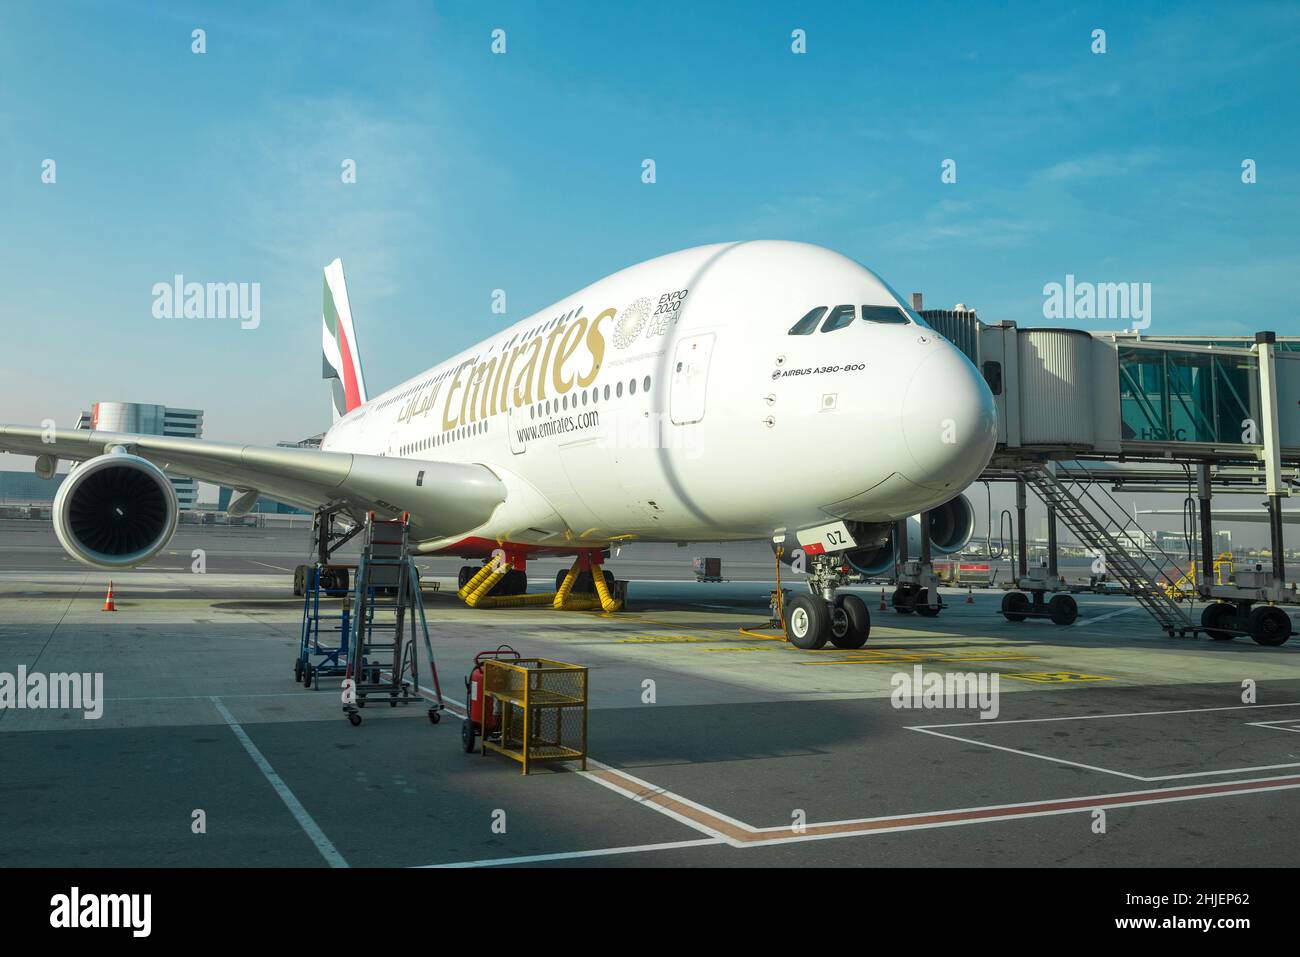 DUBAI, UAE - FEBRUARY 02, 2020: The Airbus A380-800 of Emirates Airline in the international airport Dubai on the sunny morning Stock Photo